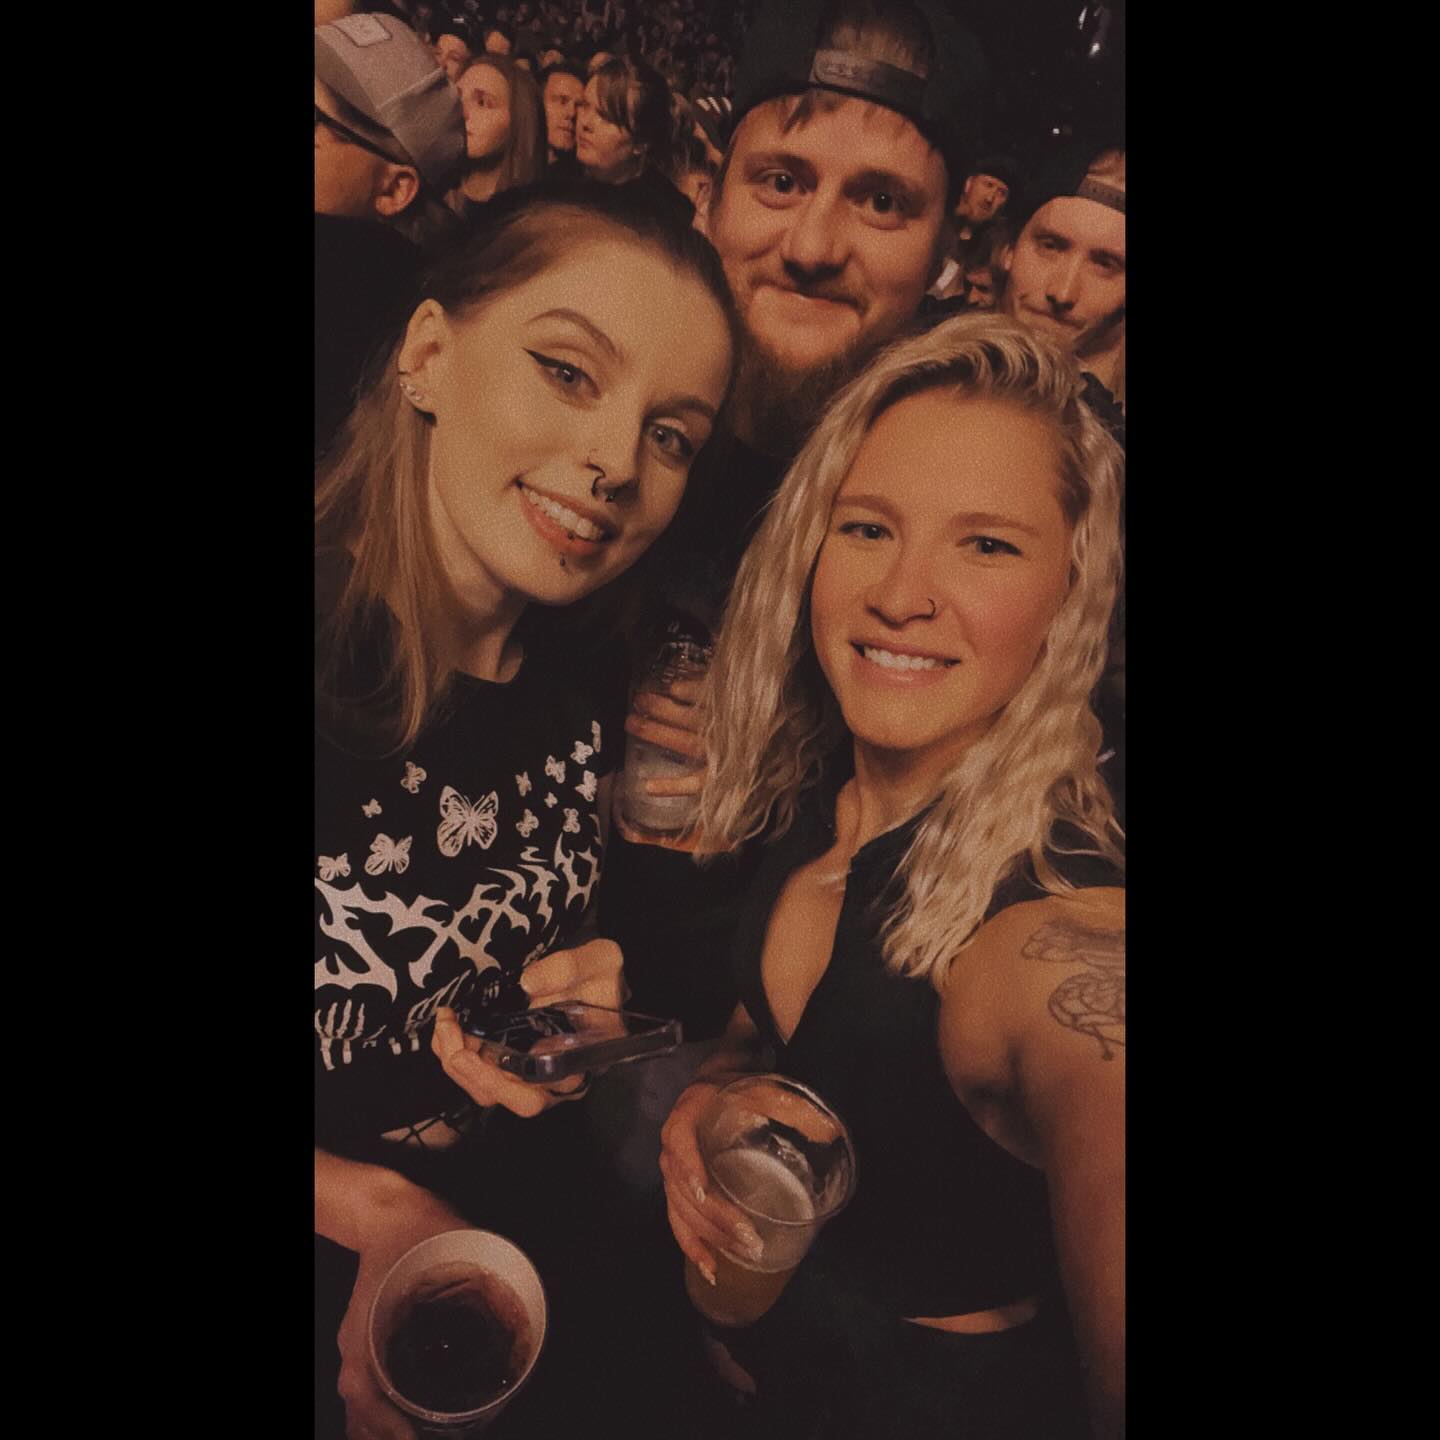 Late post but what a fun weekend! @iprevailband plus a rave with some great people🖤 I’m very thankful 🙏 ☺️